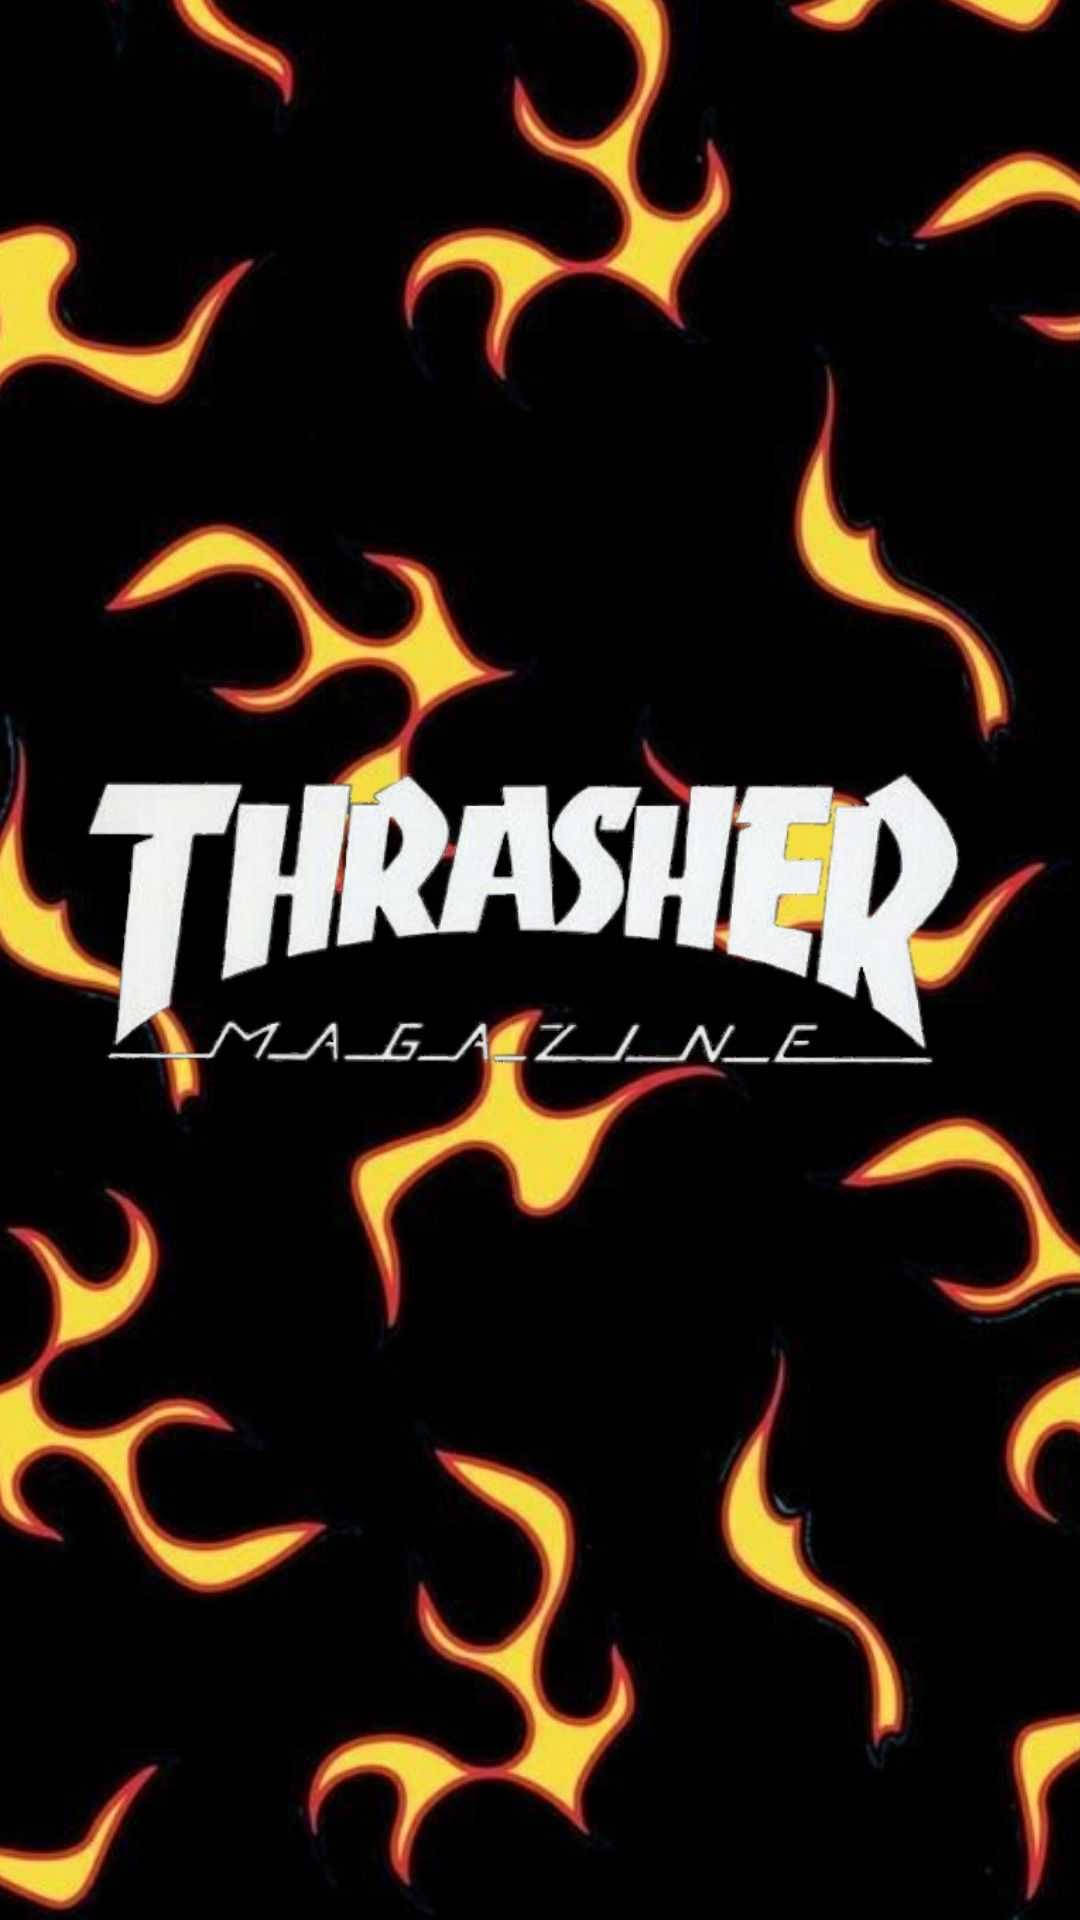 Thrasher 1080X1920 Wallpaper and Background Image